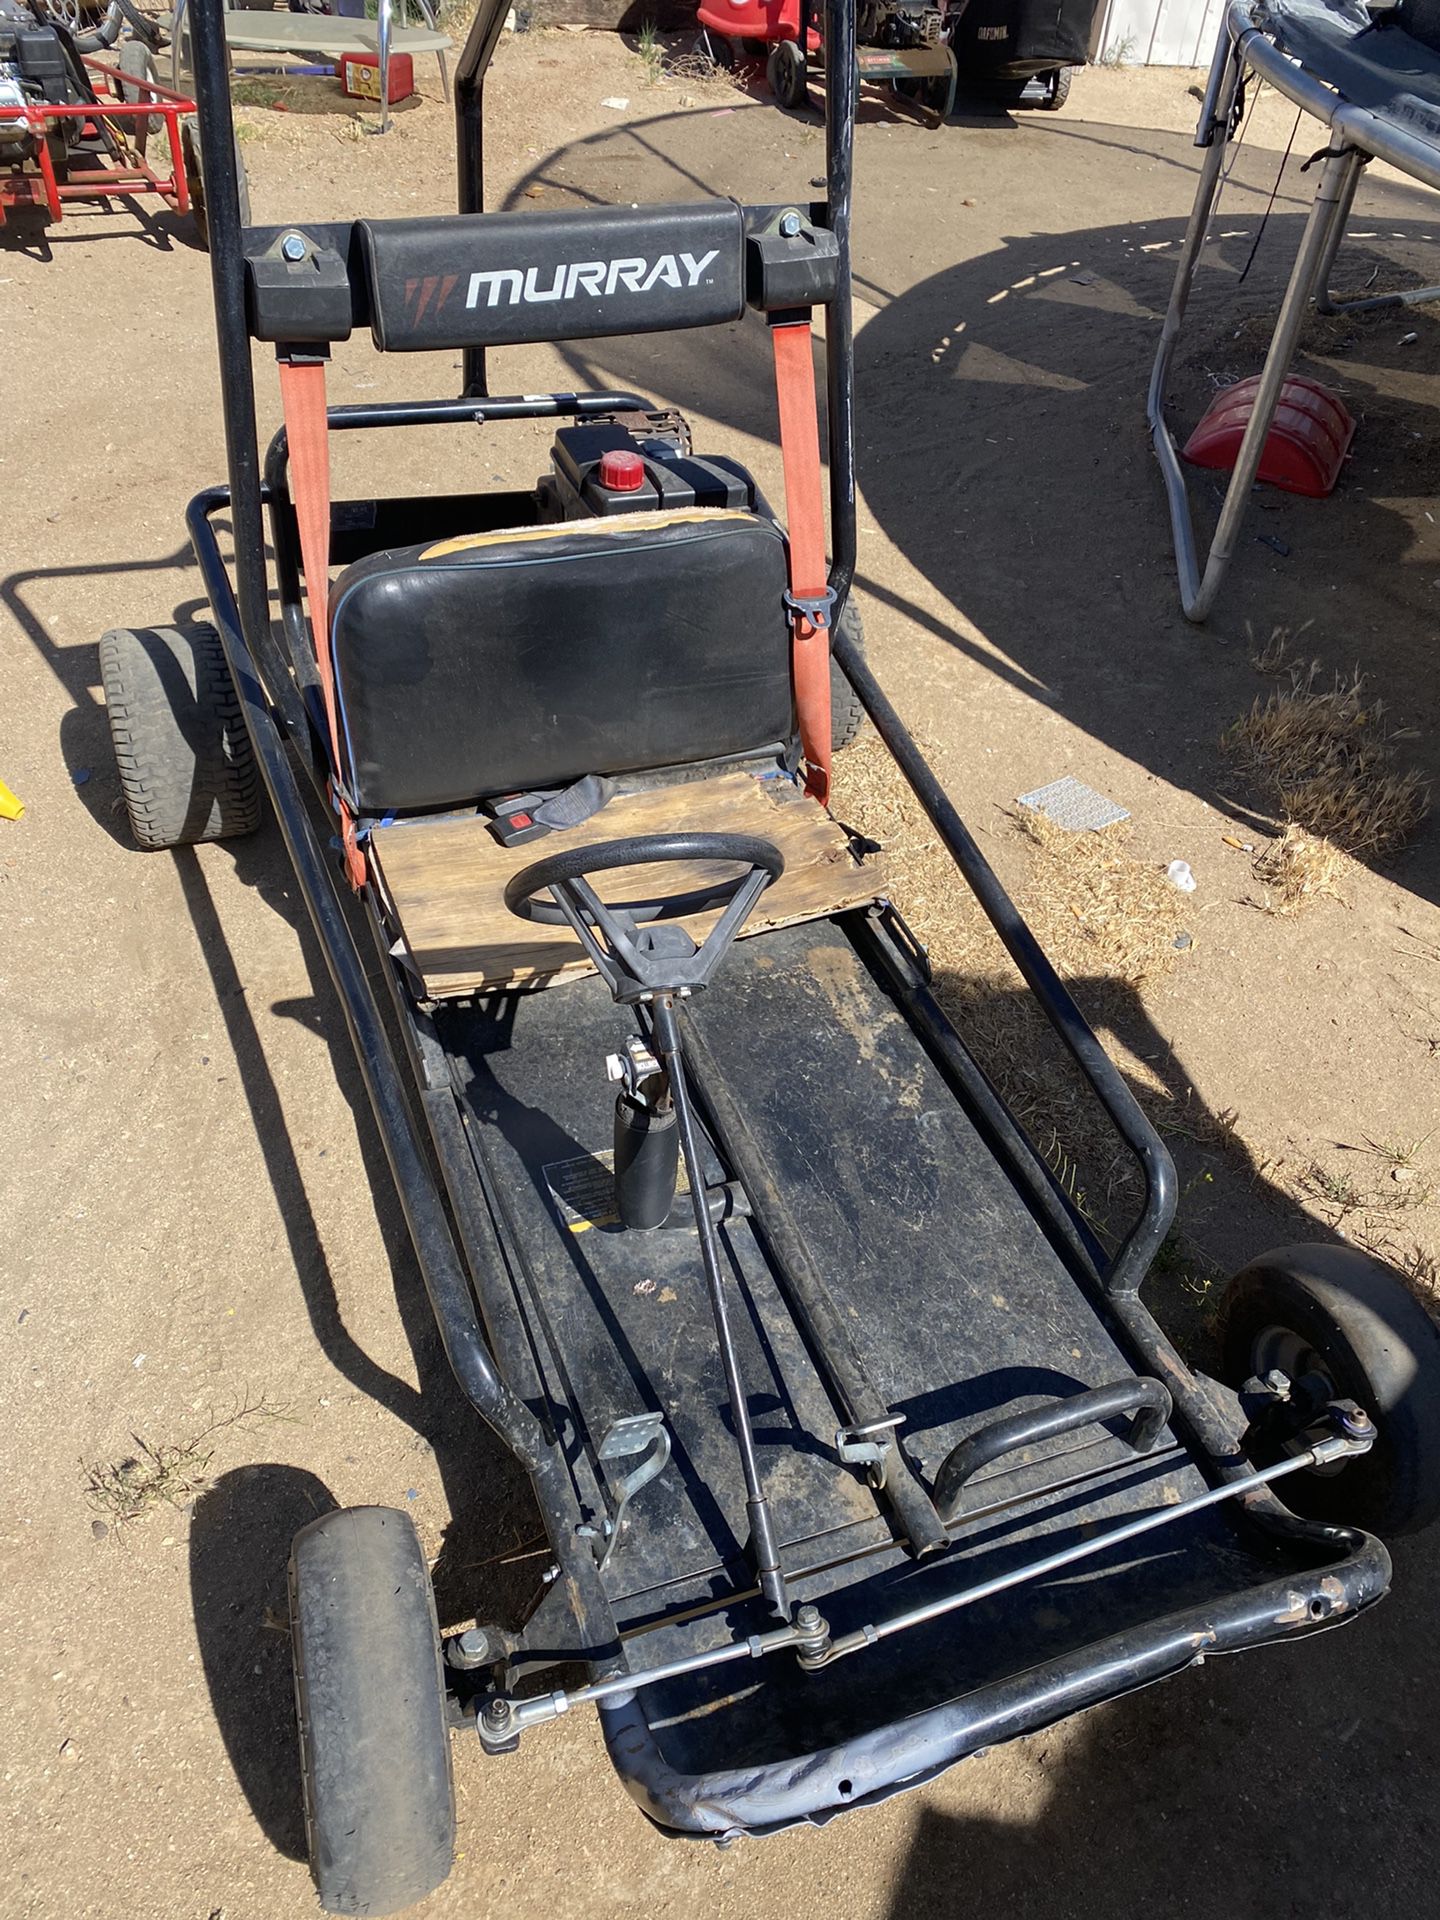 Photo 6hp Engine 2 Seater Go Kart Has Brand New Front Tires On And A Brand New Back Set Starts Right Up And Runs. Will Trade For A Quad Or Dirtbike